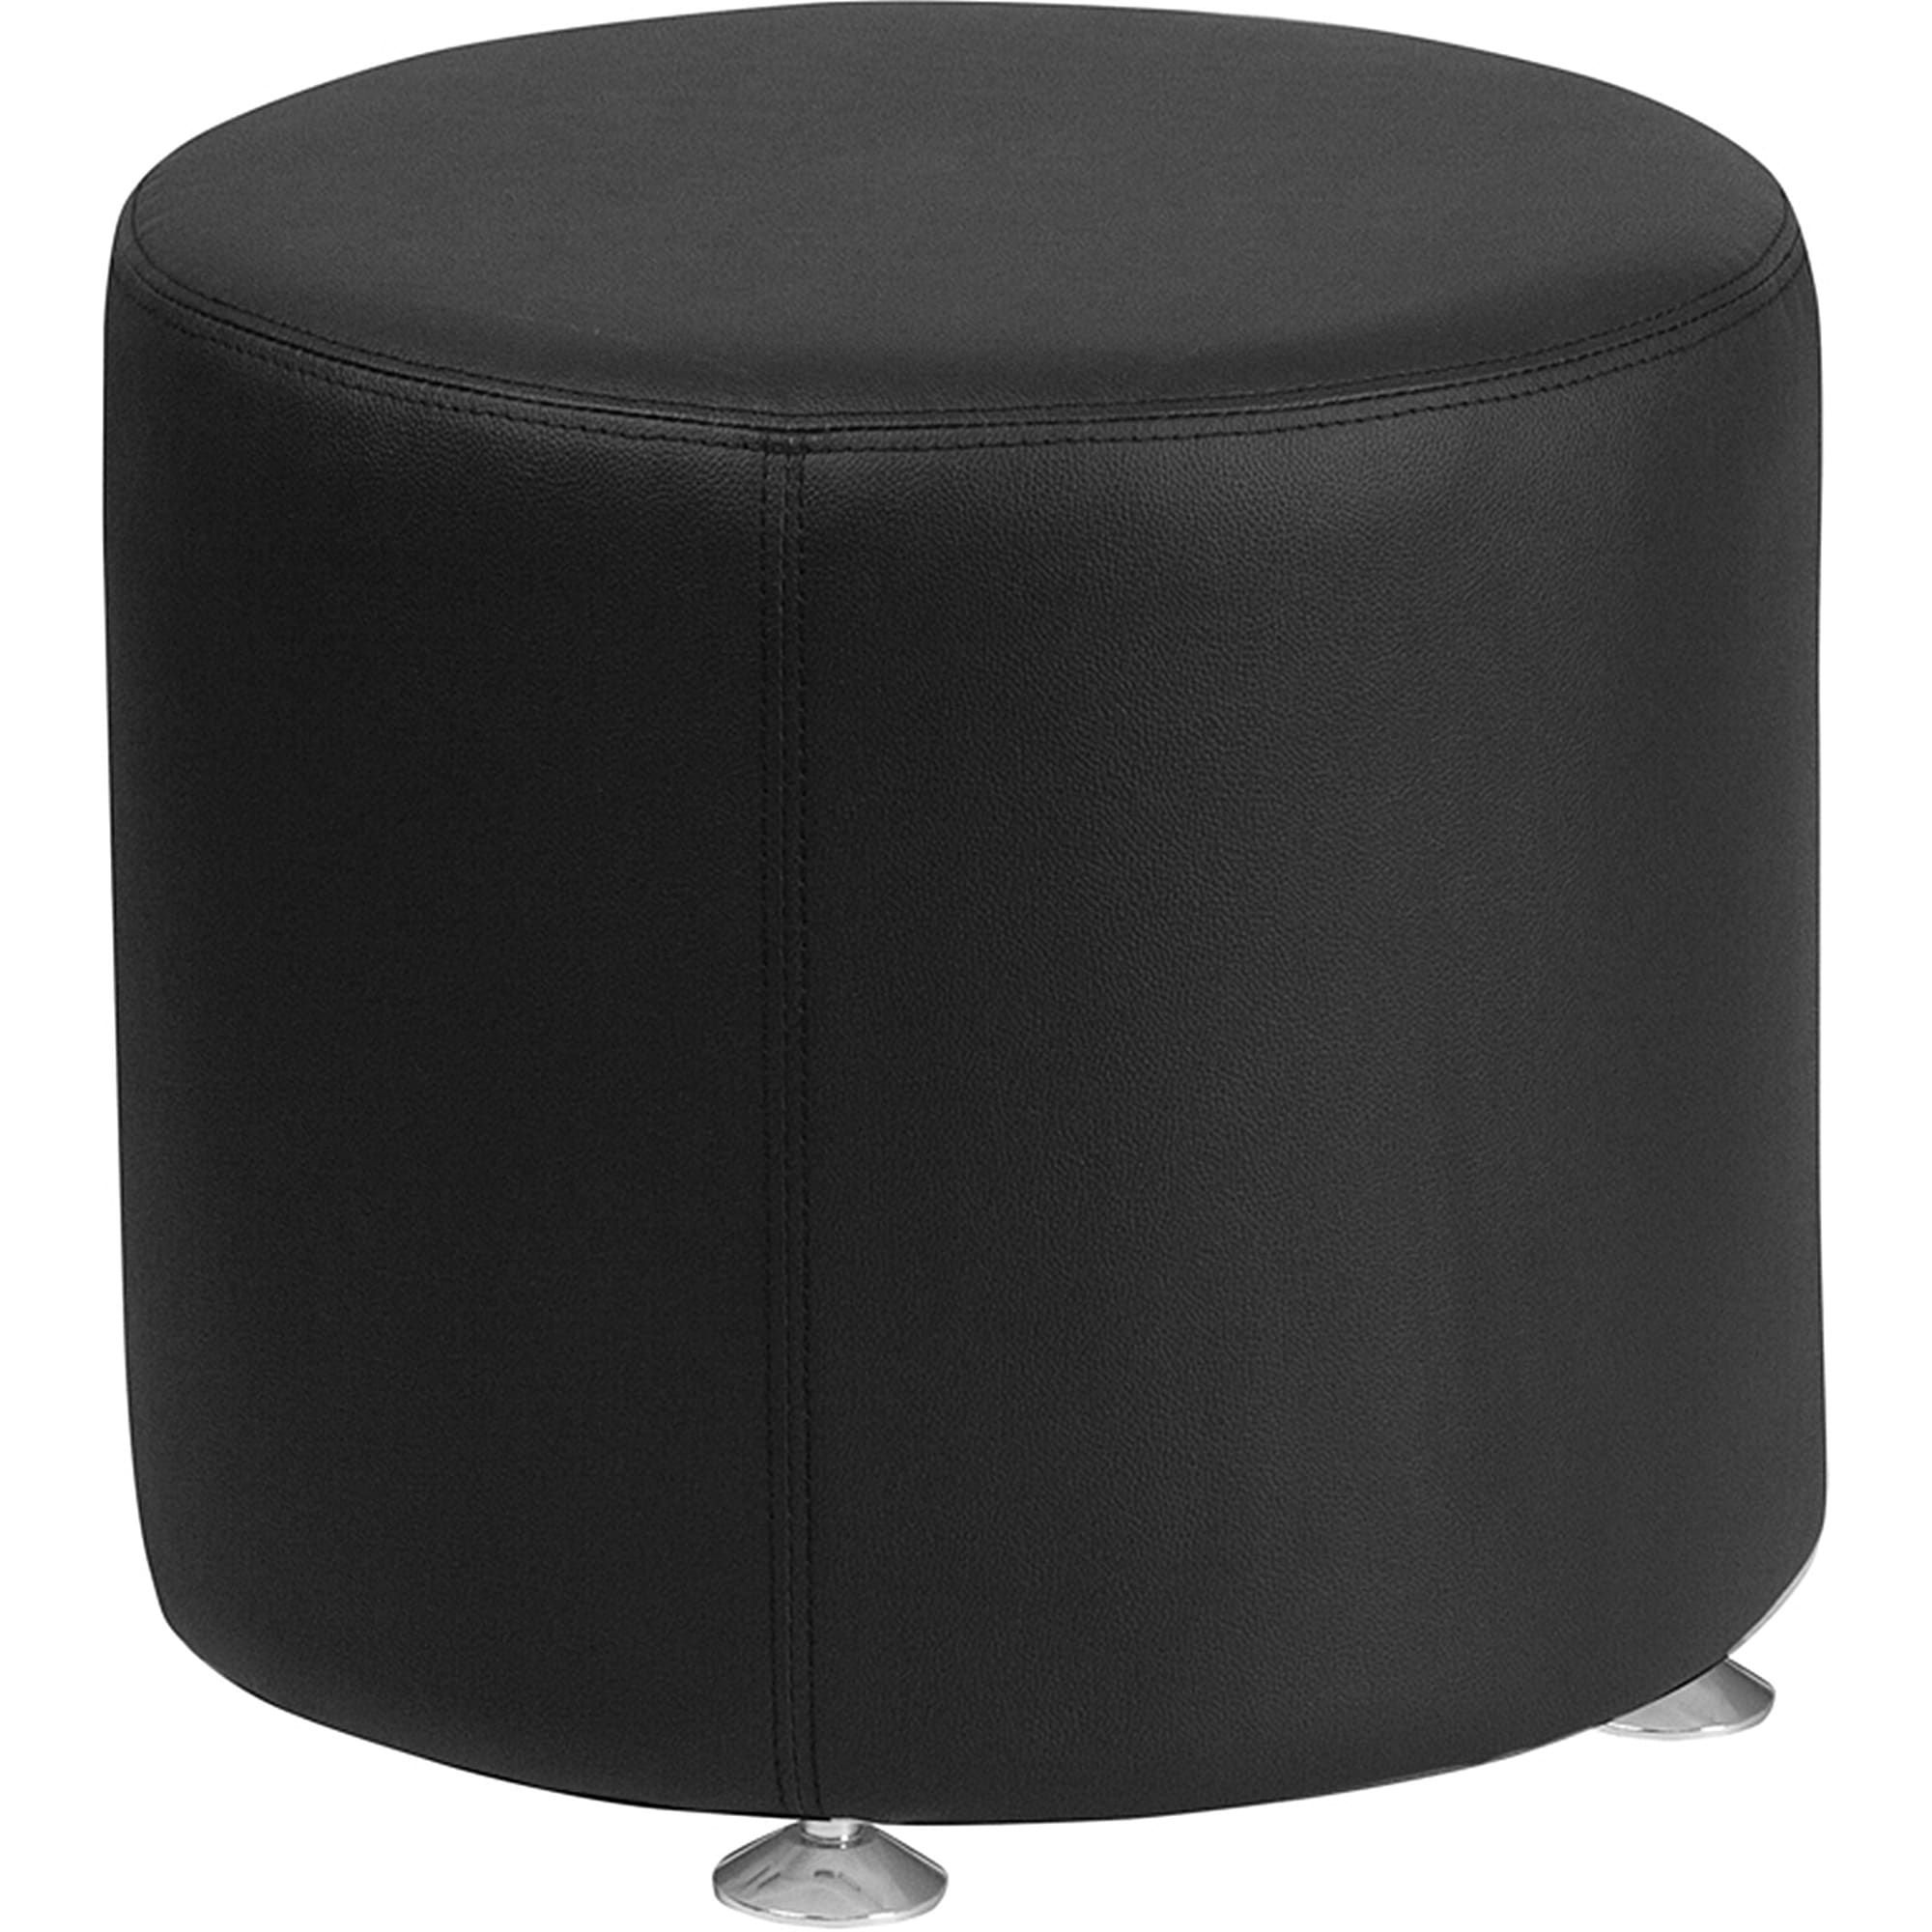 Antrim Black Leather Upholstered Round Ottoman Black Medium | Ebay Pertaining To Gold And White Leather Round Ottomans (View 13 of 20)